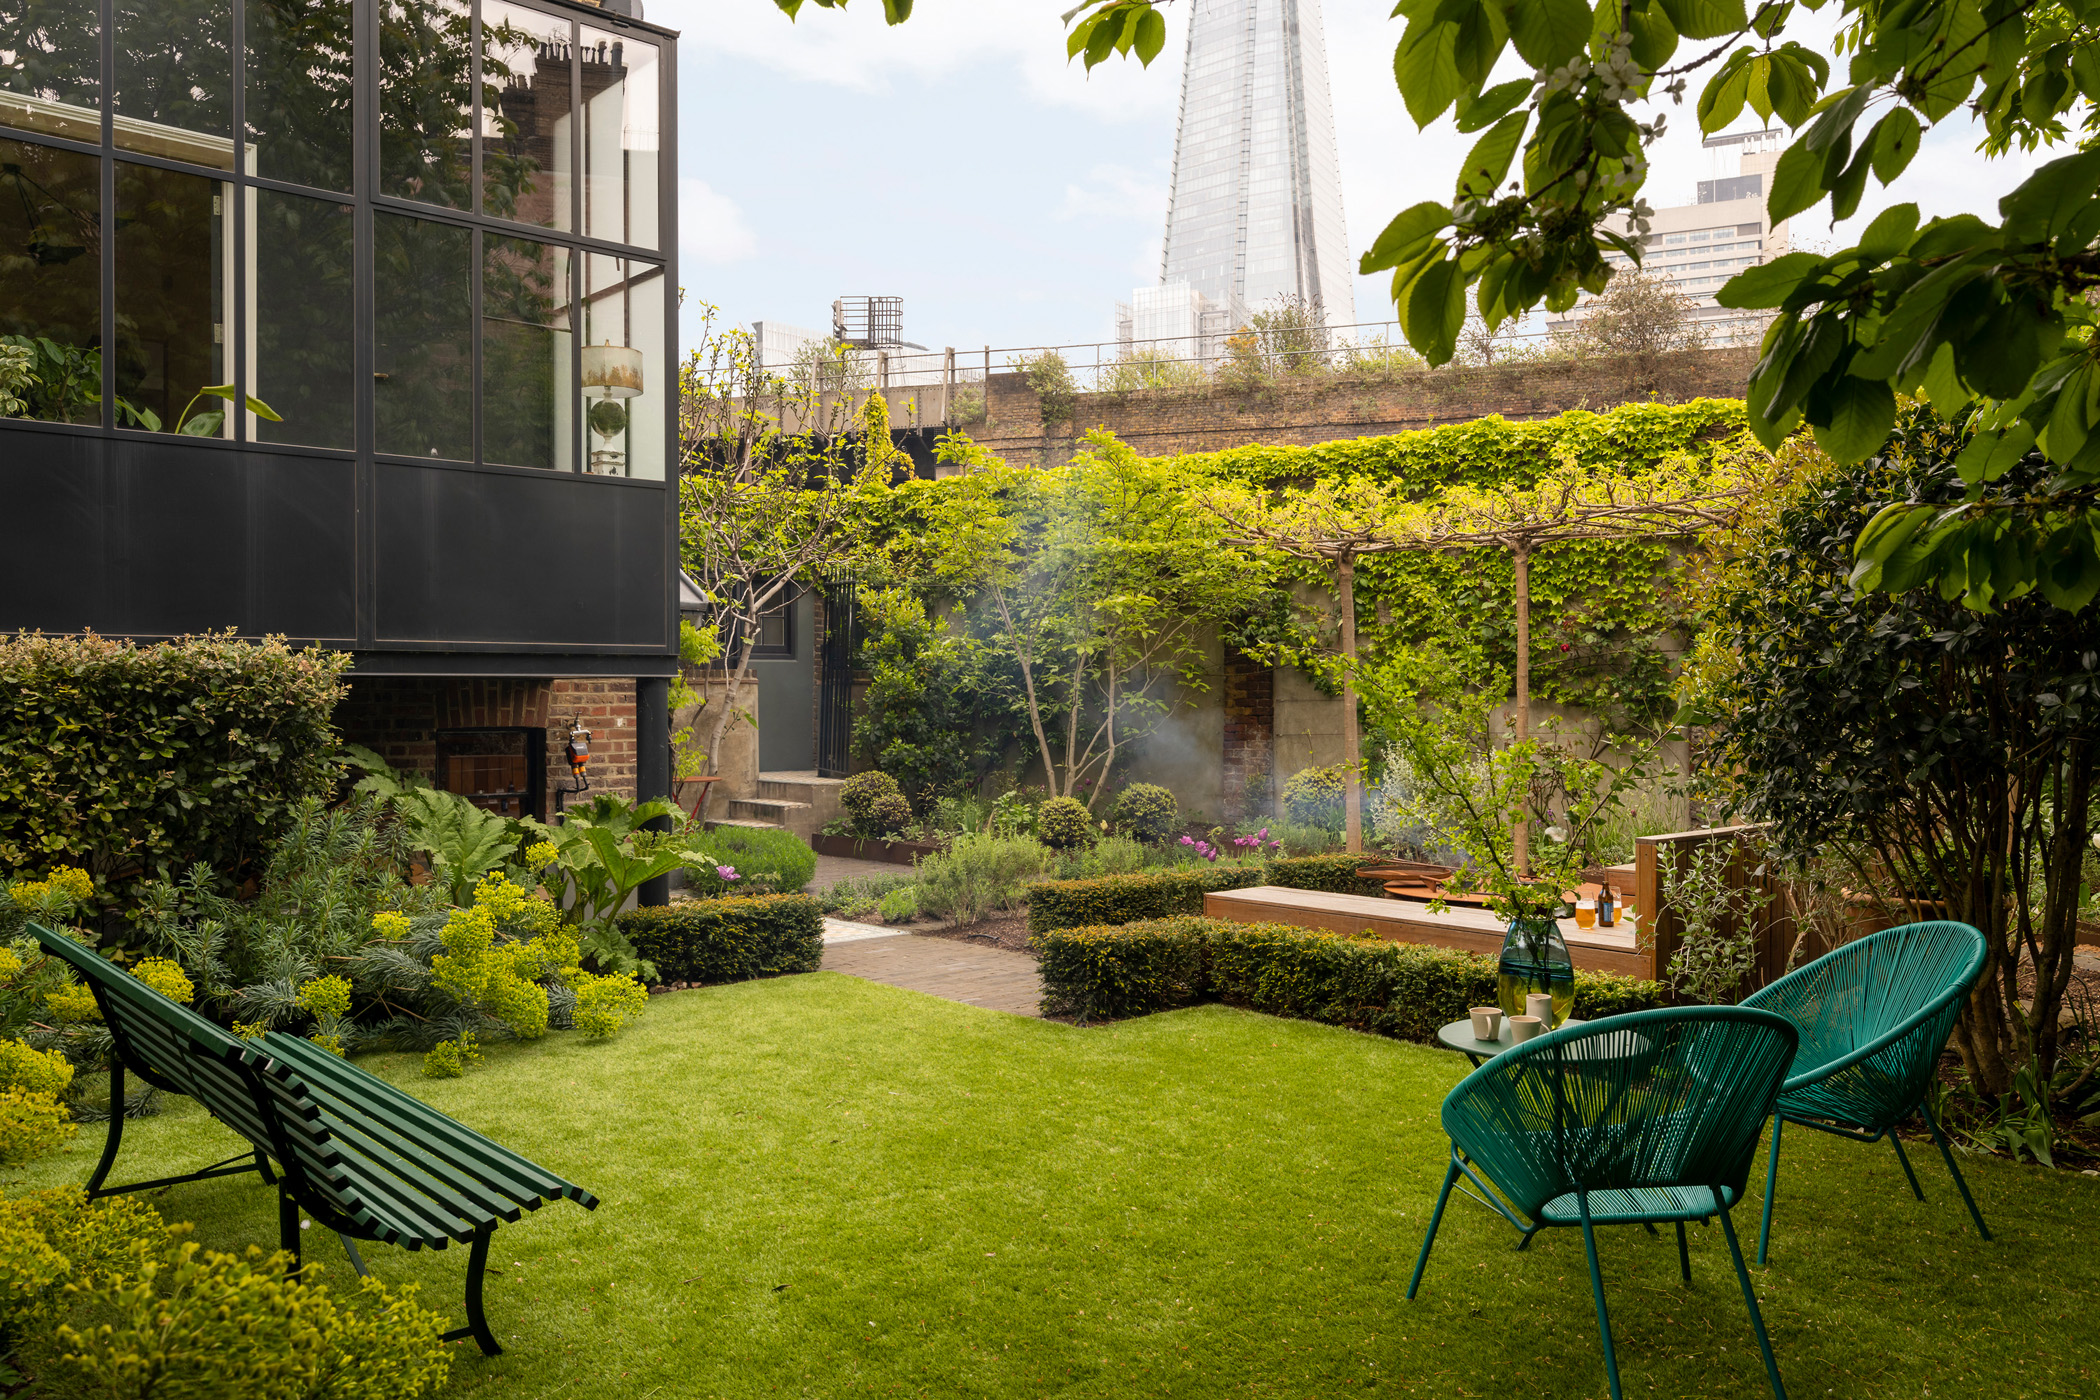 Spacious private garden of a five-bedroom townhouse for sale on London’s South Bank